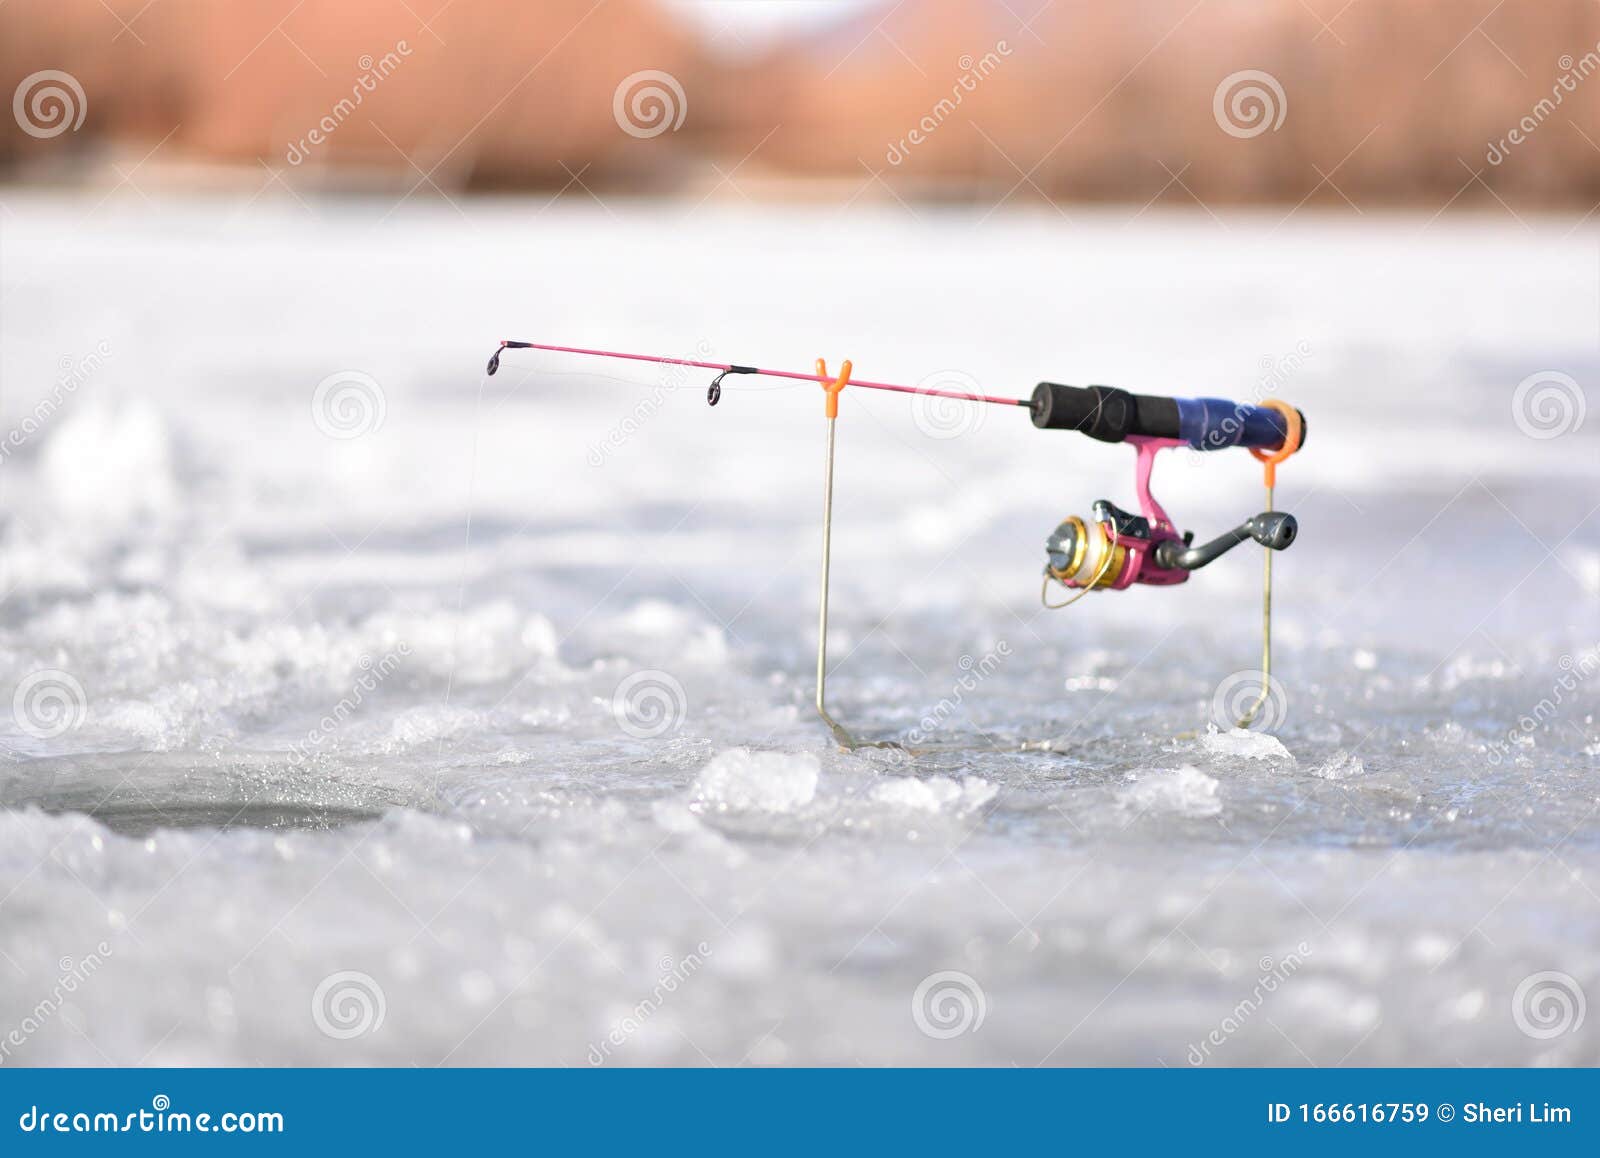 Ice Fishing Pole with Pink Real and Pole Sitting on Ice Waiting for Fish  Stock Image - Image of winter, next: 166616759